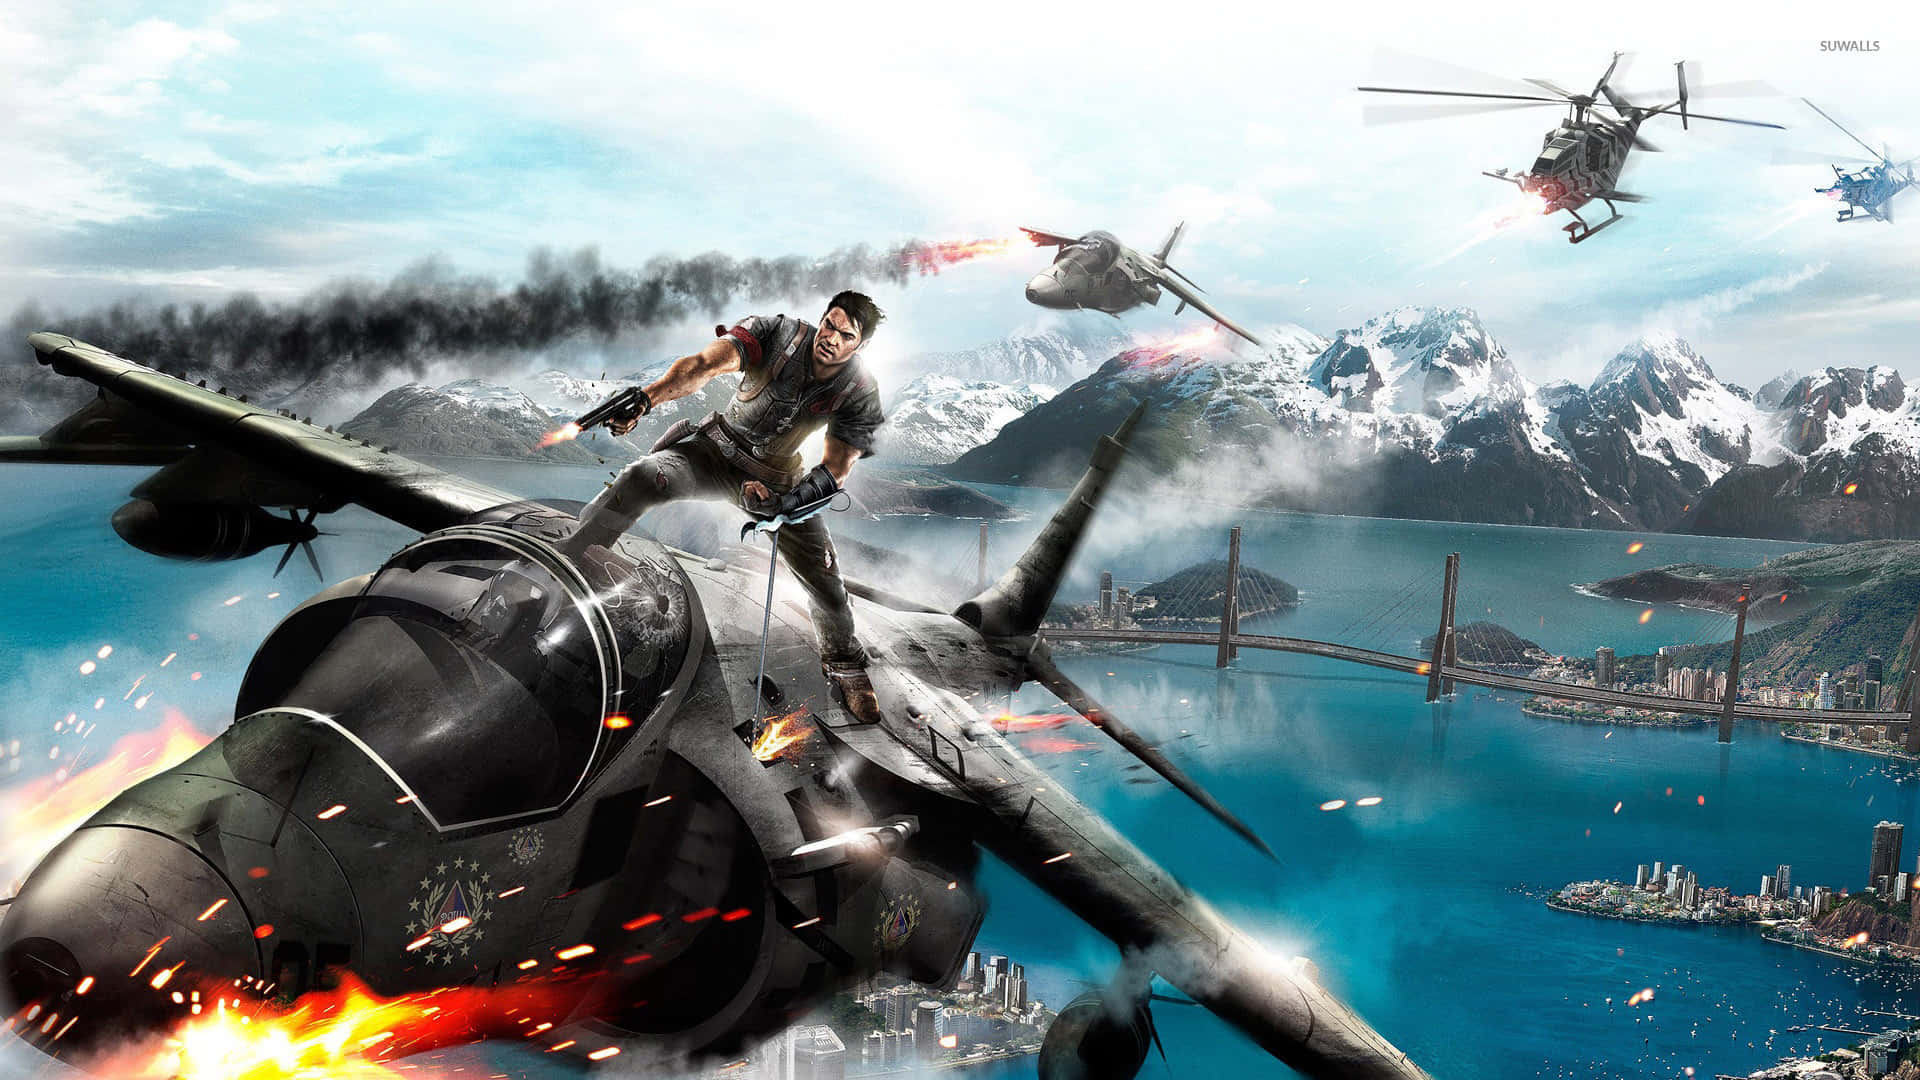 Thrilling Action in Just Cause 4 High Definition Wallpaper